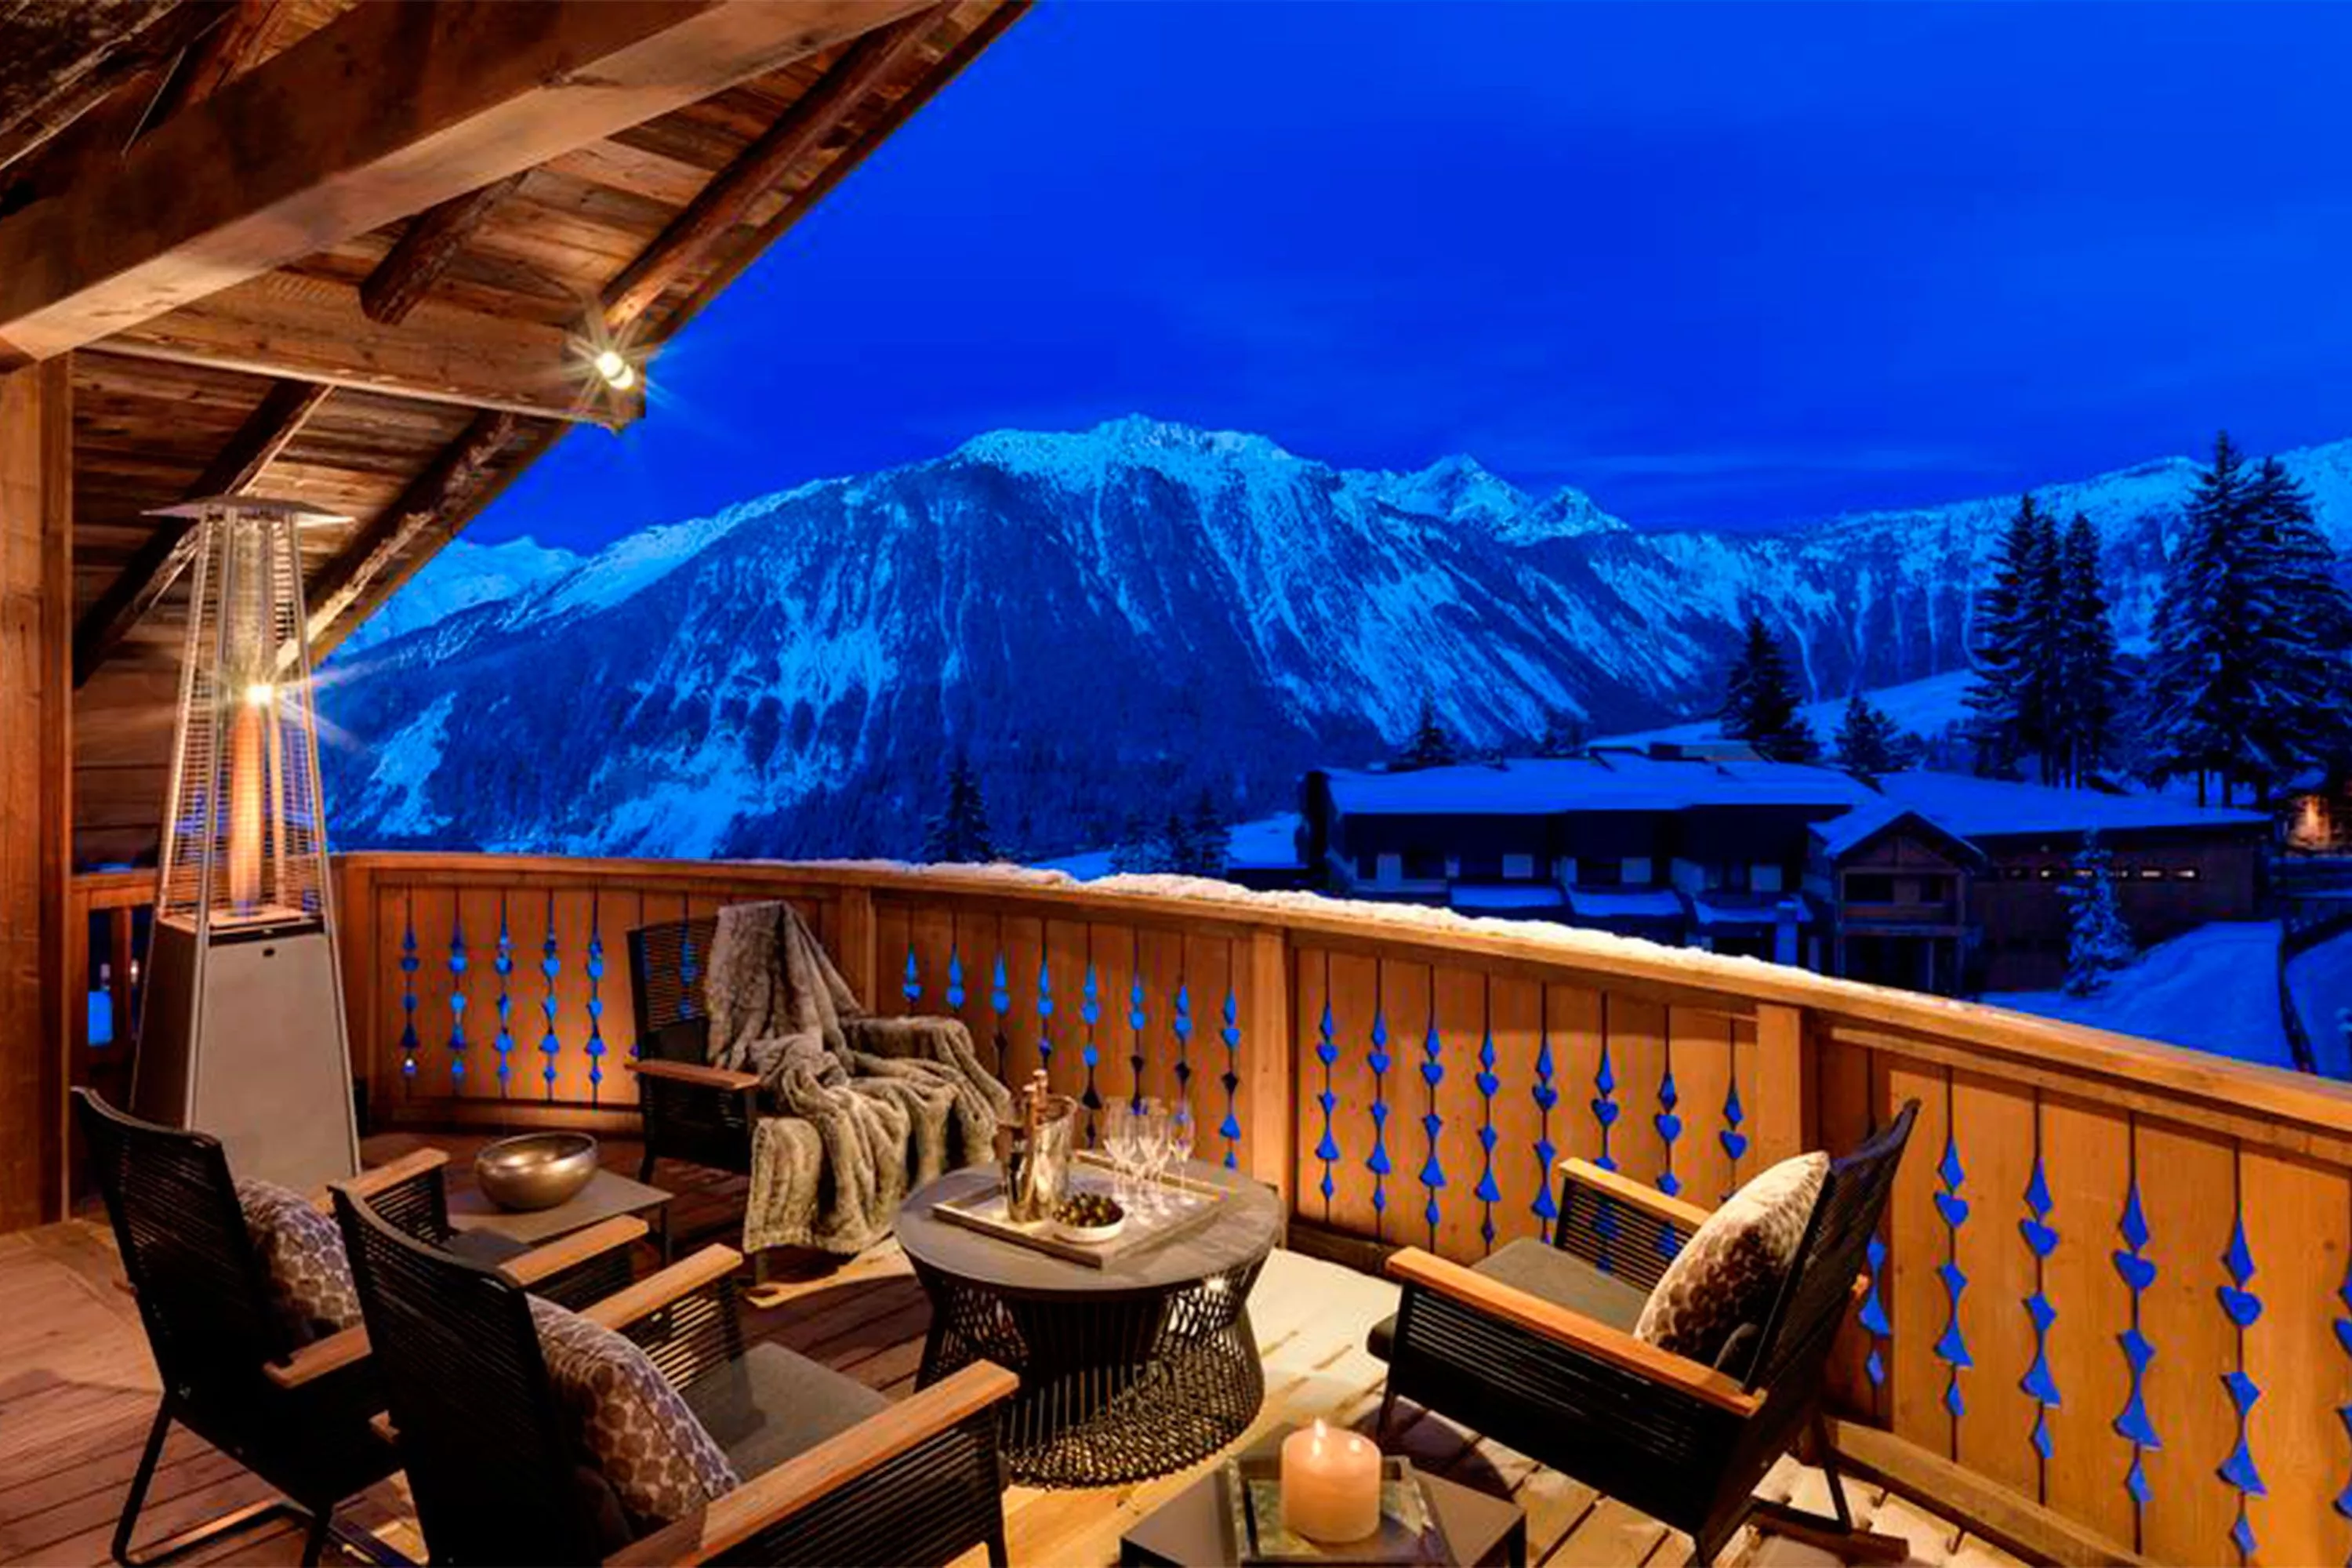 Six Senses Spa Courchevel in France, Europe | SPAs - Rated 0.8